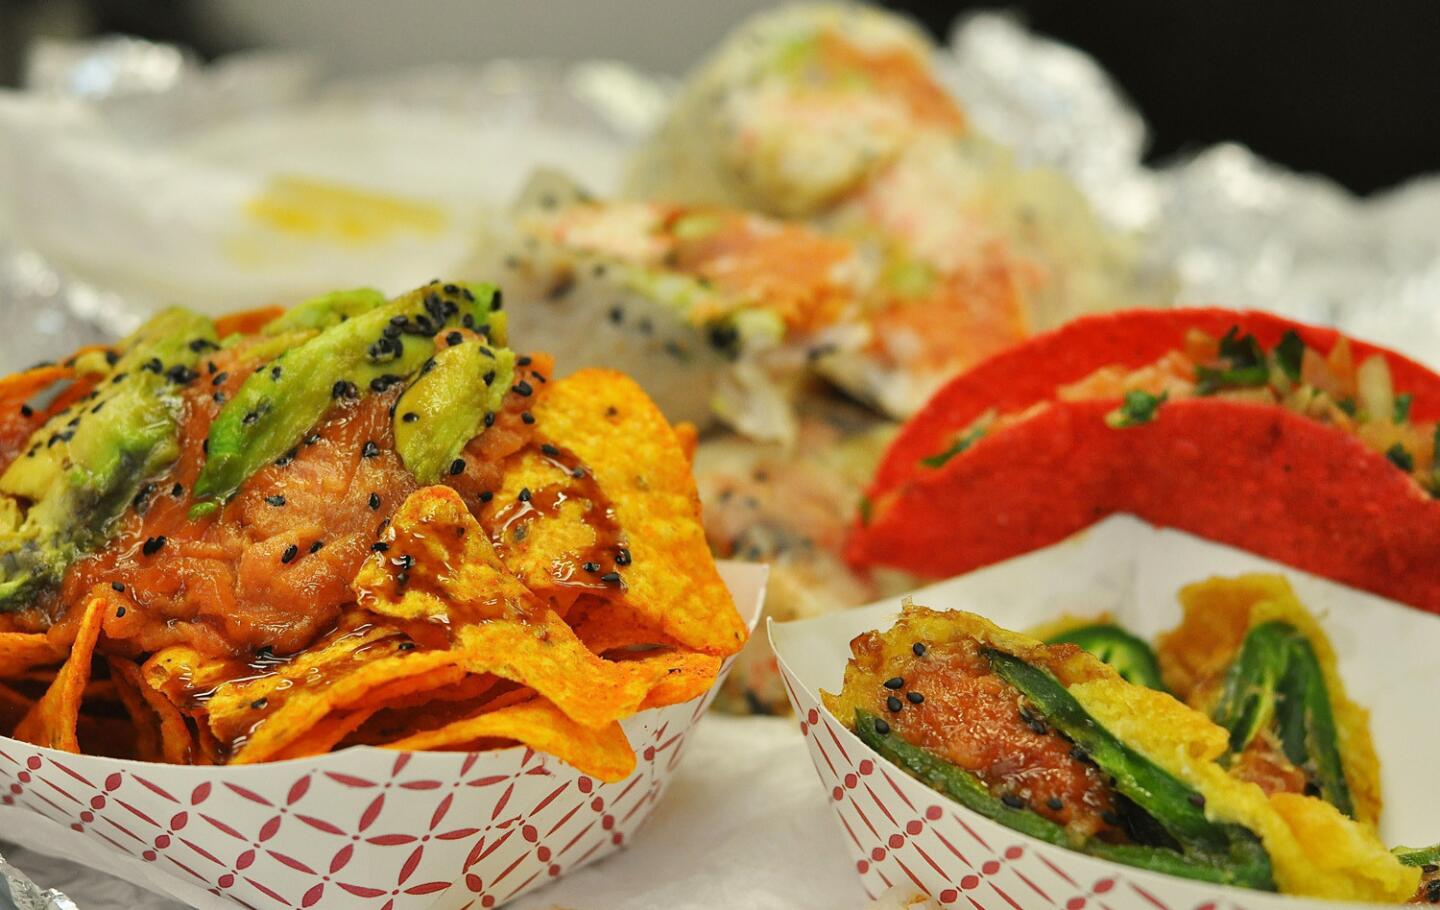 A selection of items from the Jogasaki burrito truck, including the spicy tuna nachos (left), sushi burritos, sashimi taco and jalapeno poppers.